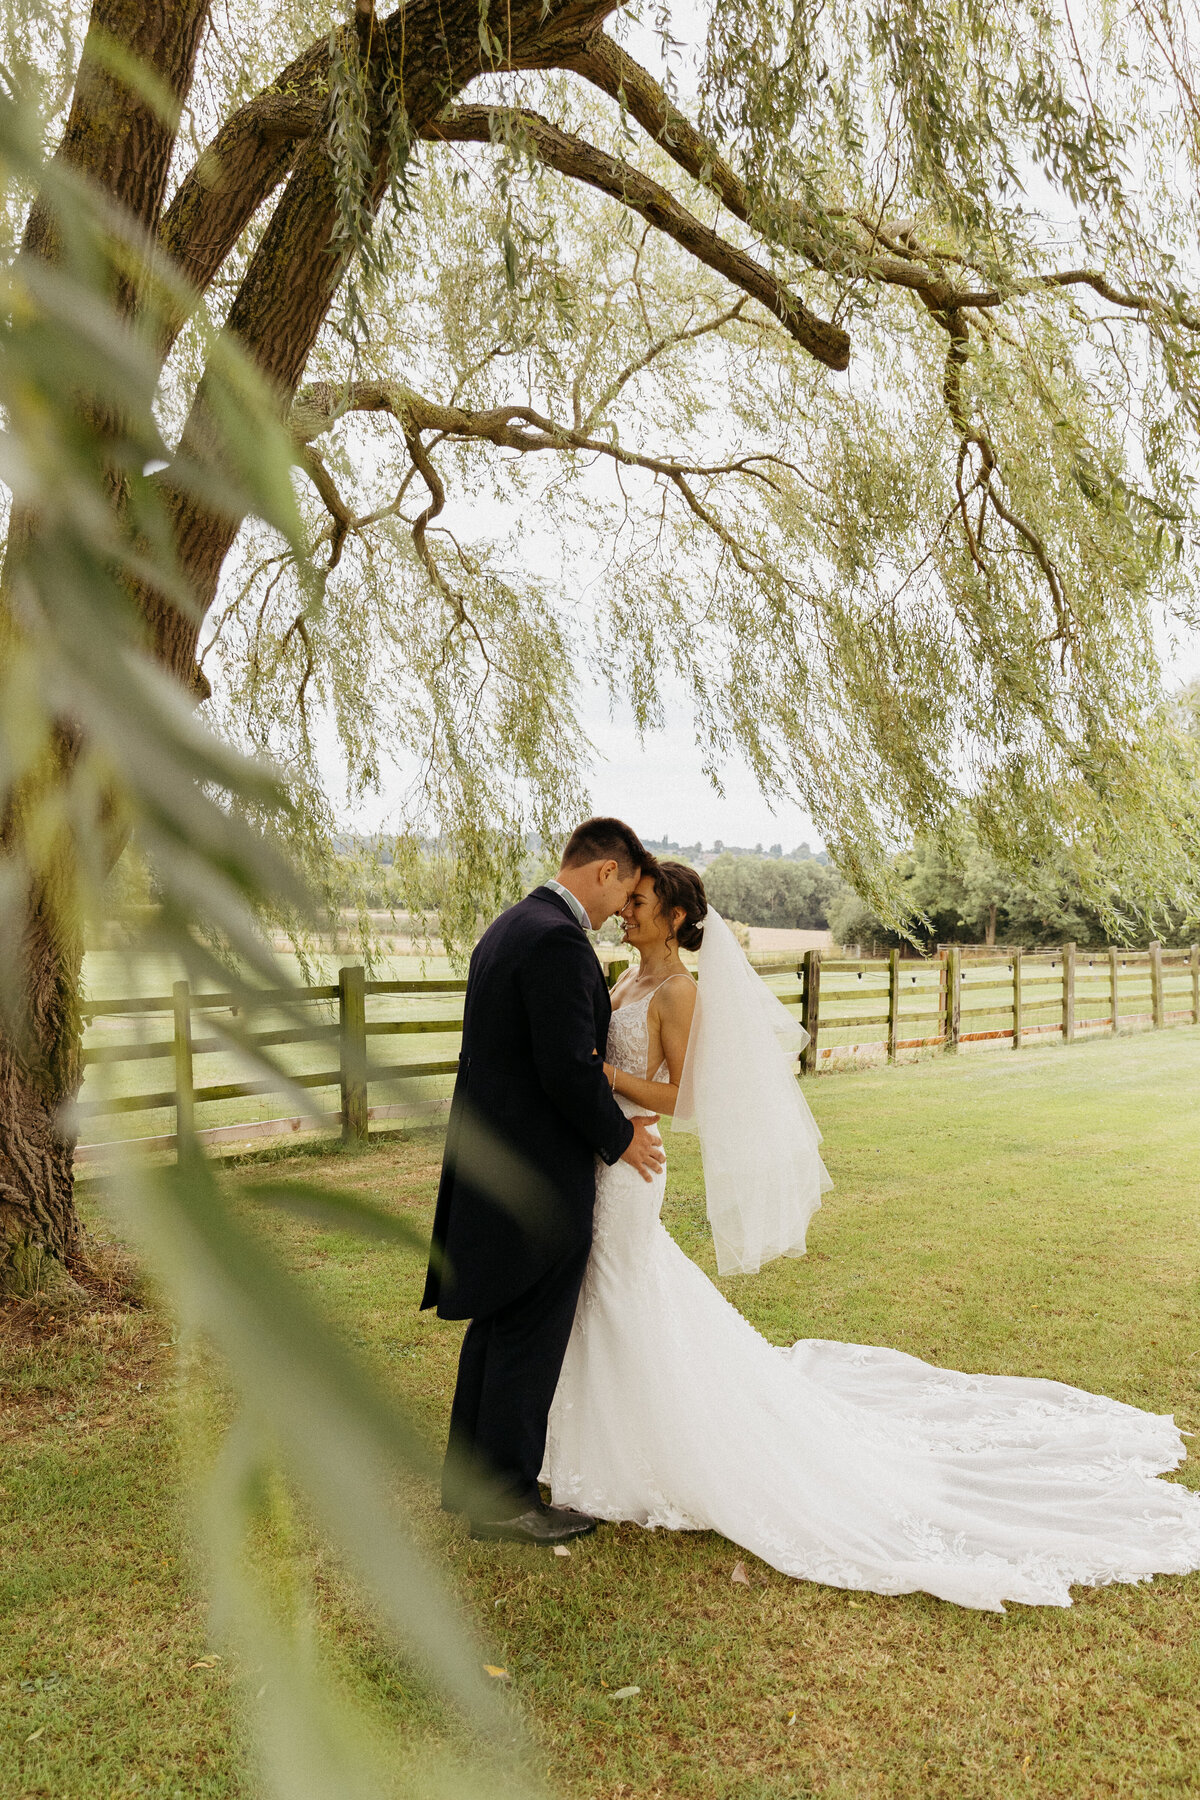 Amy Cutliffe Photography (71)